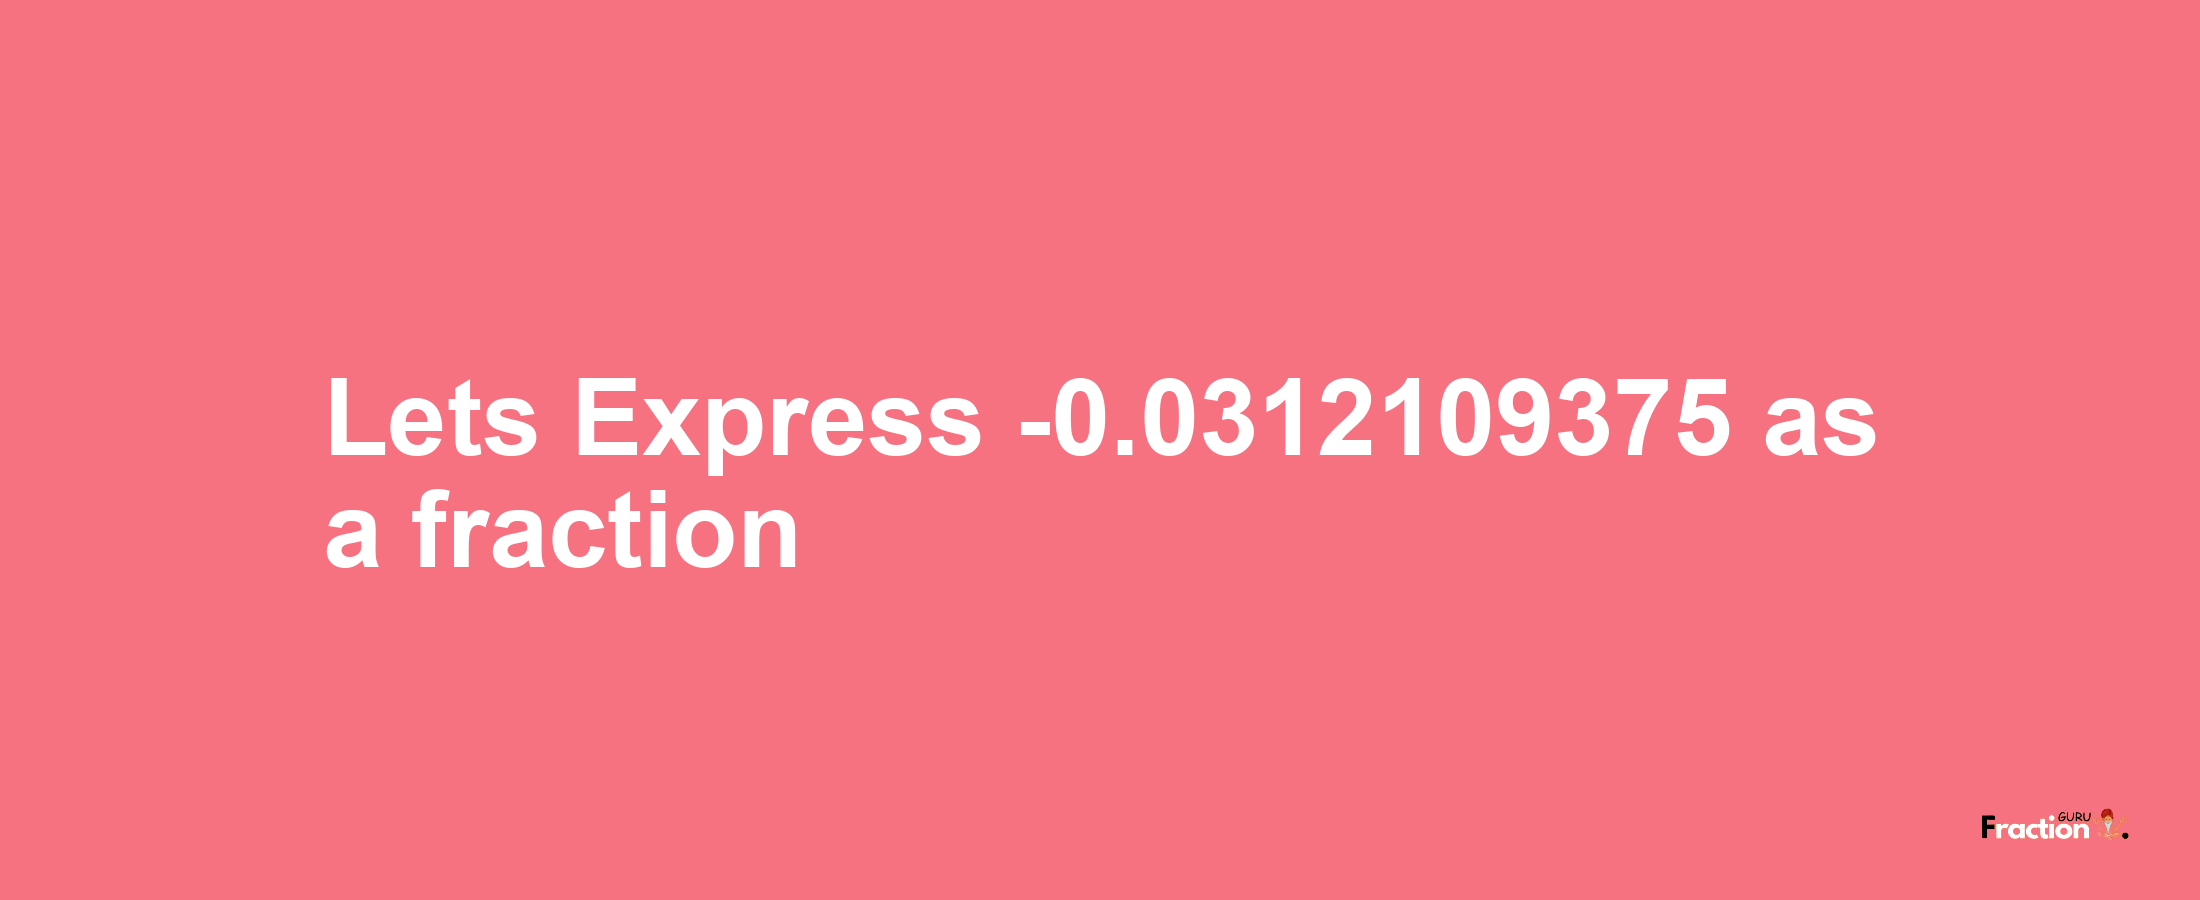 Lets Express -0.0312109375 as afraction